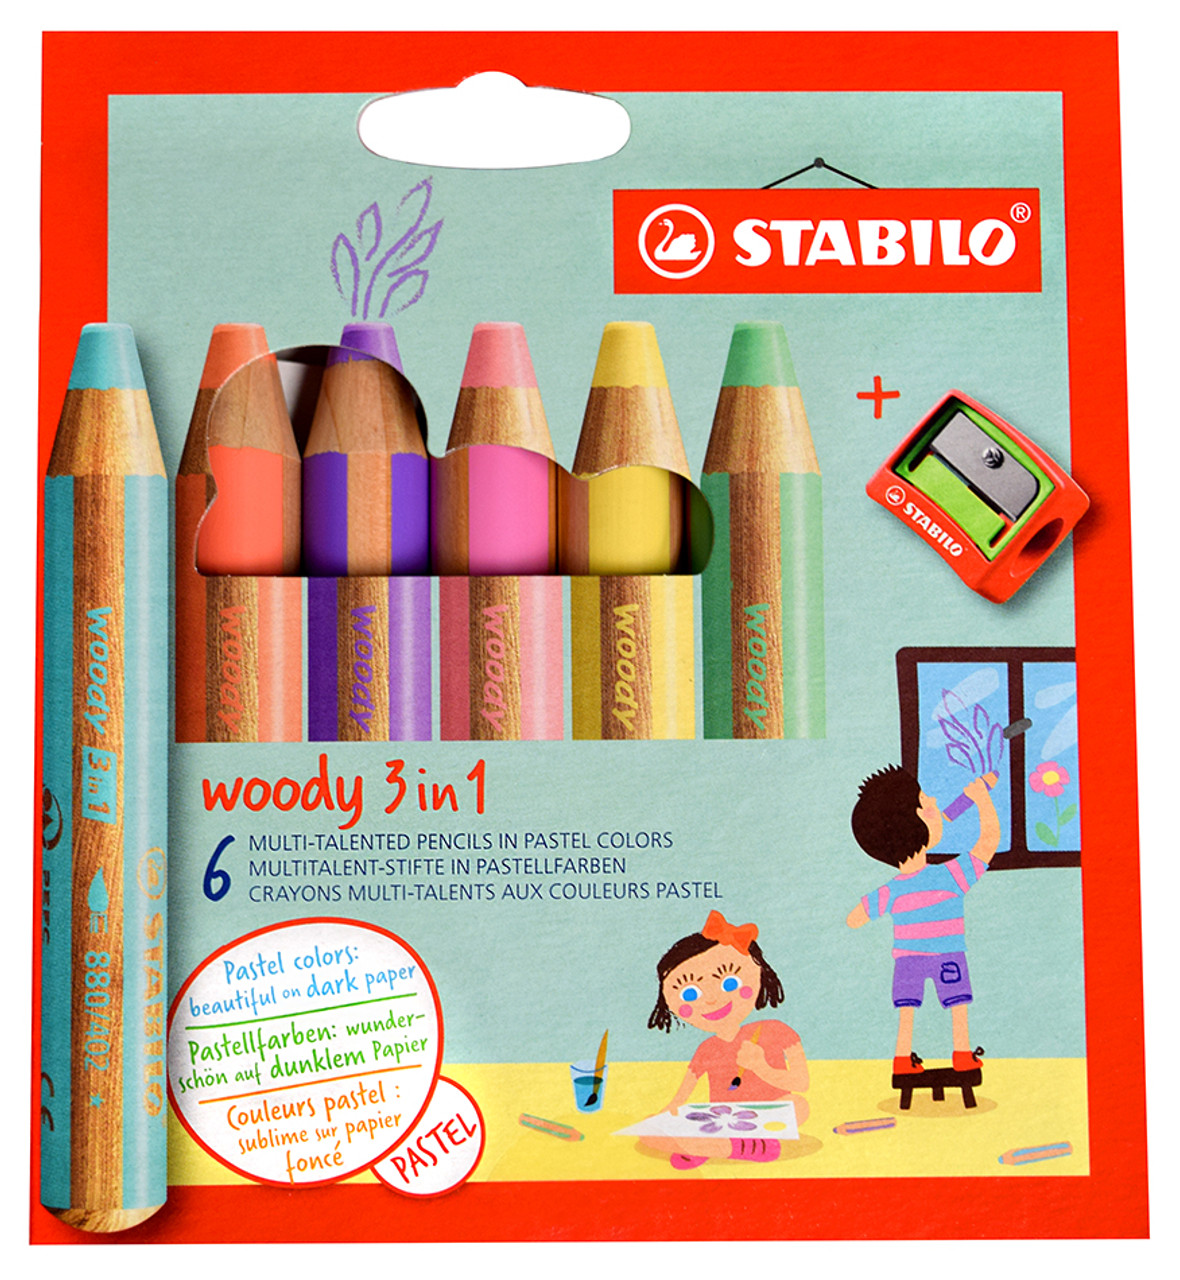 STABILO Woody 3 in 1, Set of 18 with Sharpener